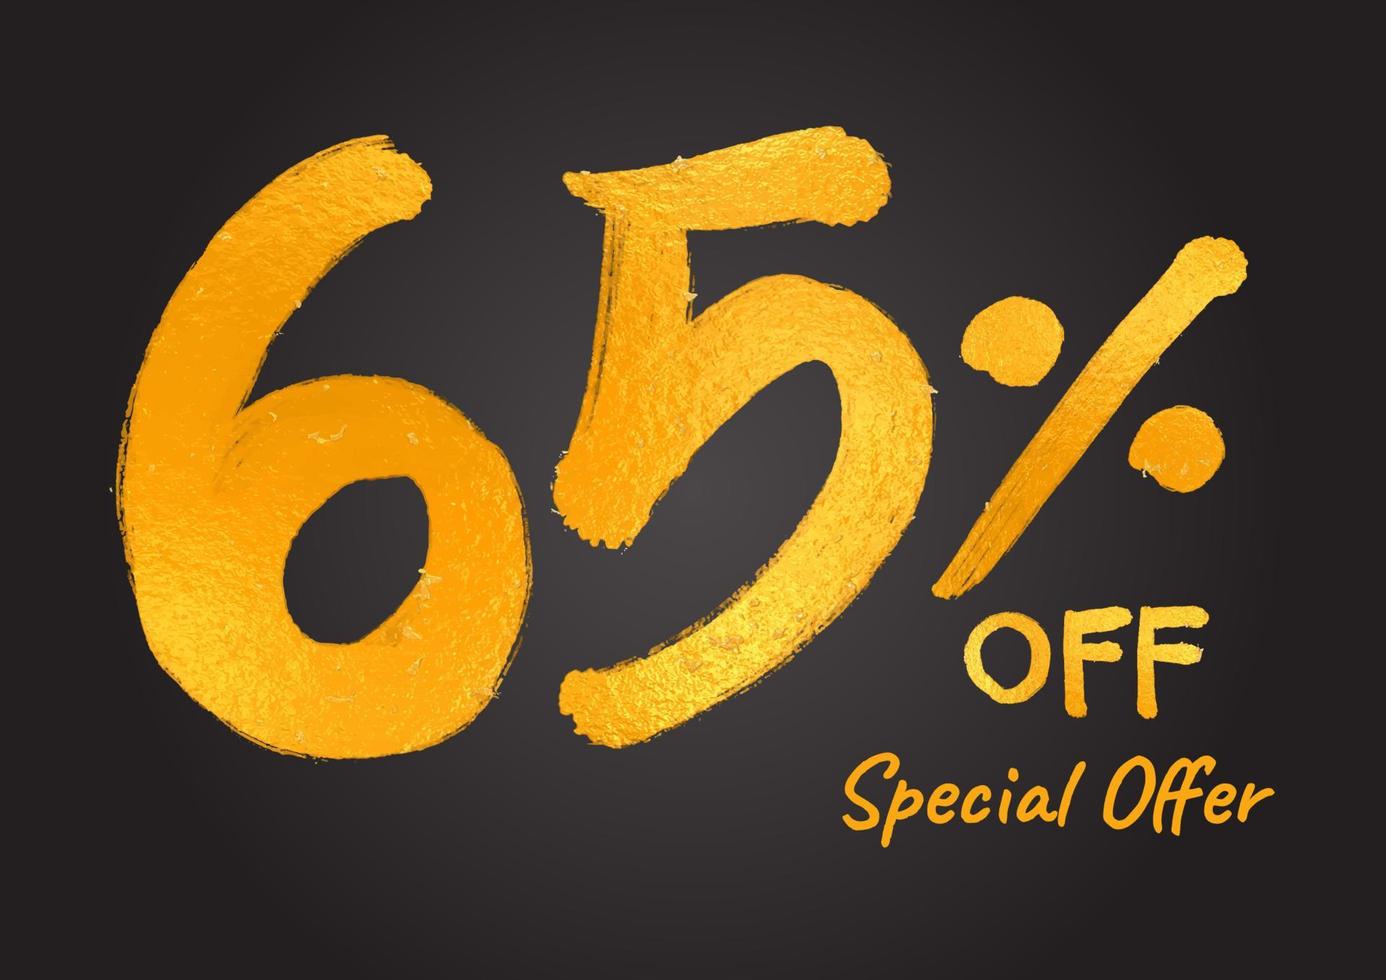 65 percent off Special Offer Gold Lettering Numbers brush drawing hand drawn sketch vector